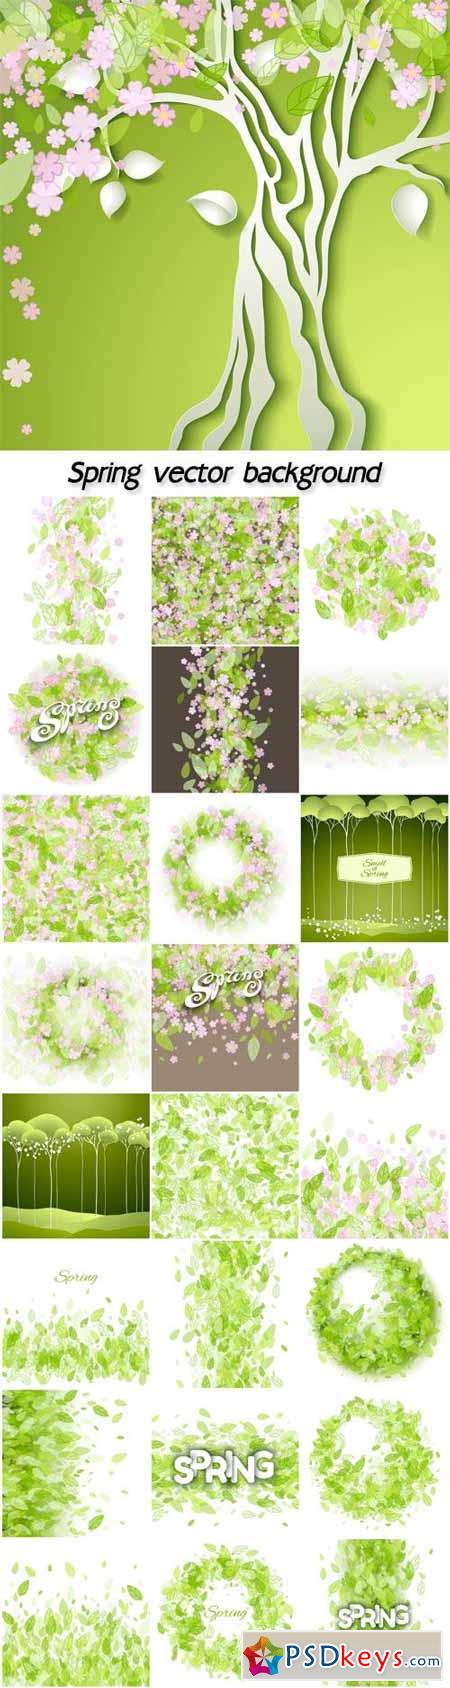 Spring vector background with green leaves and flowers